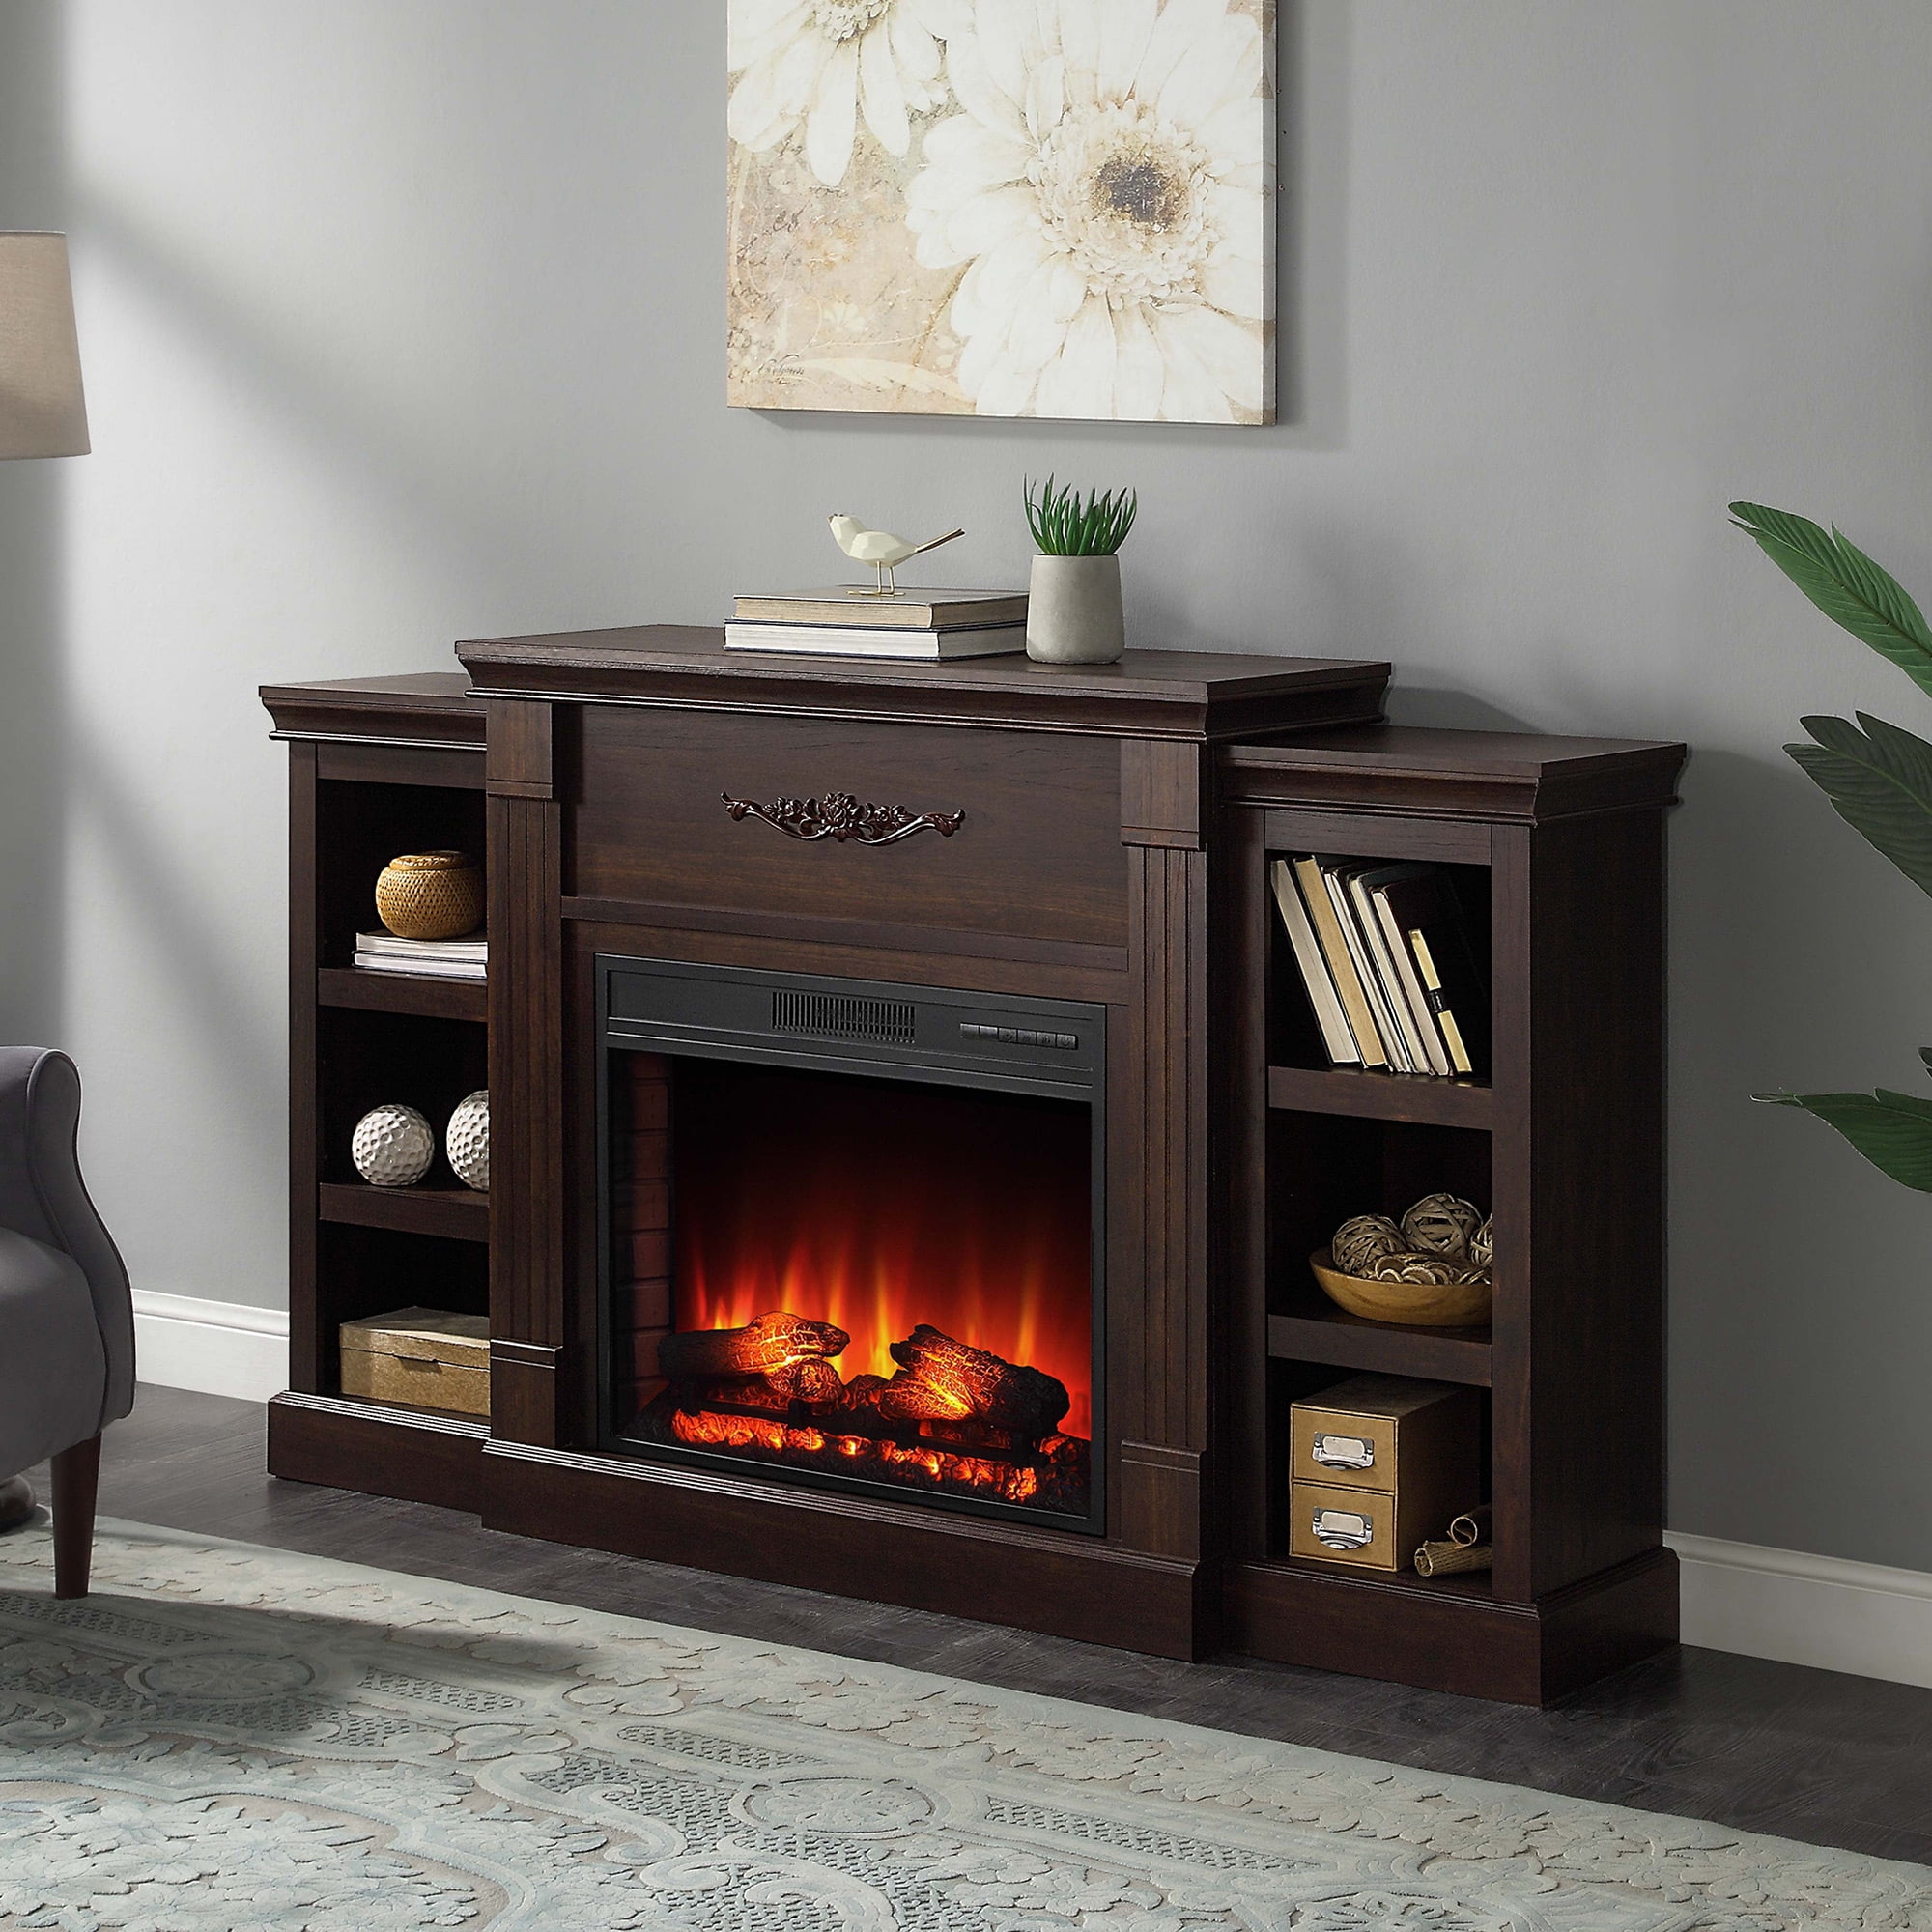 Belleze 70 Mantel Brown Electric, 70 Inch Wide Electric Fireplace